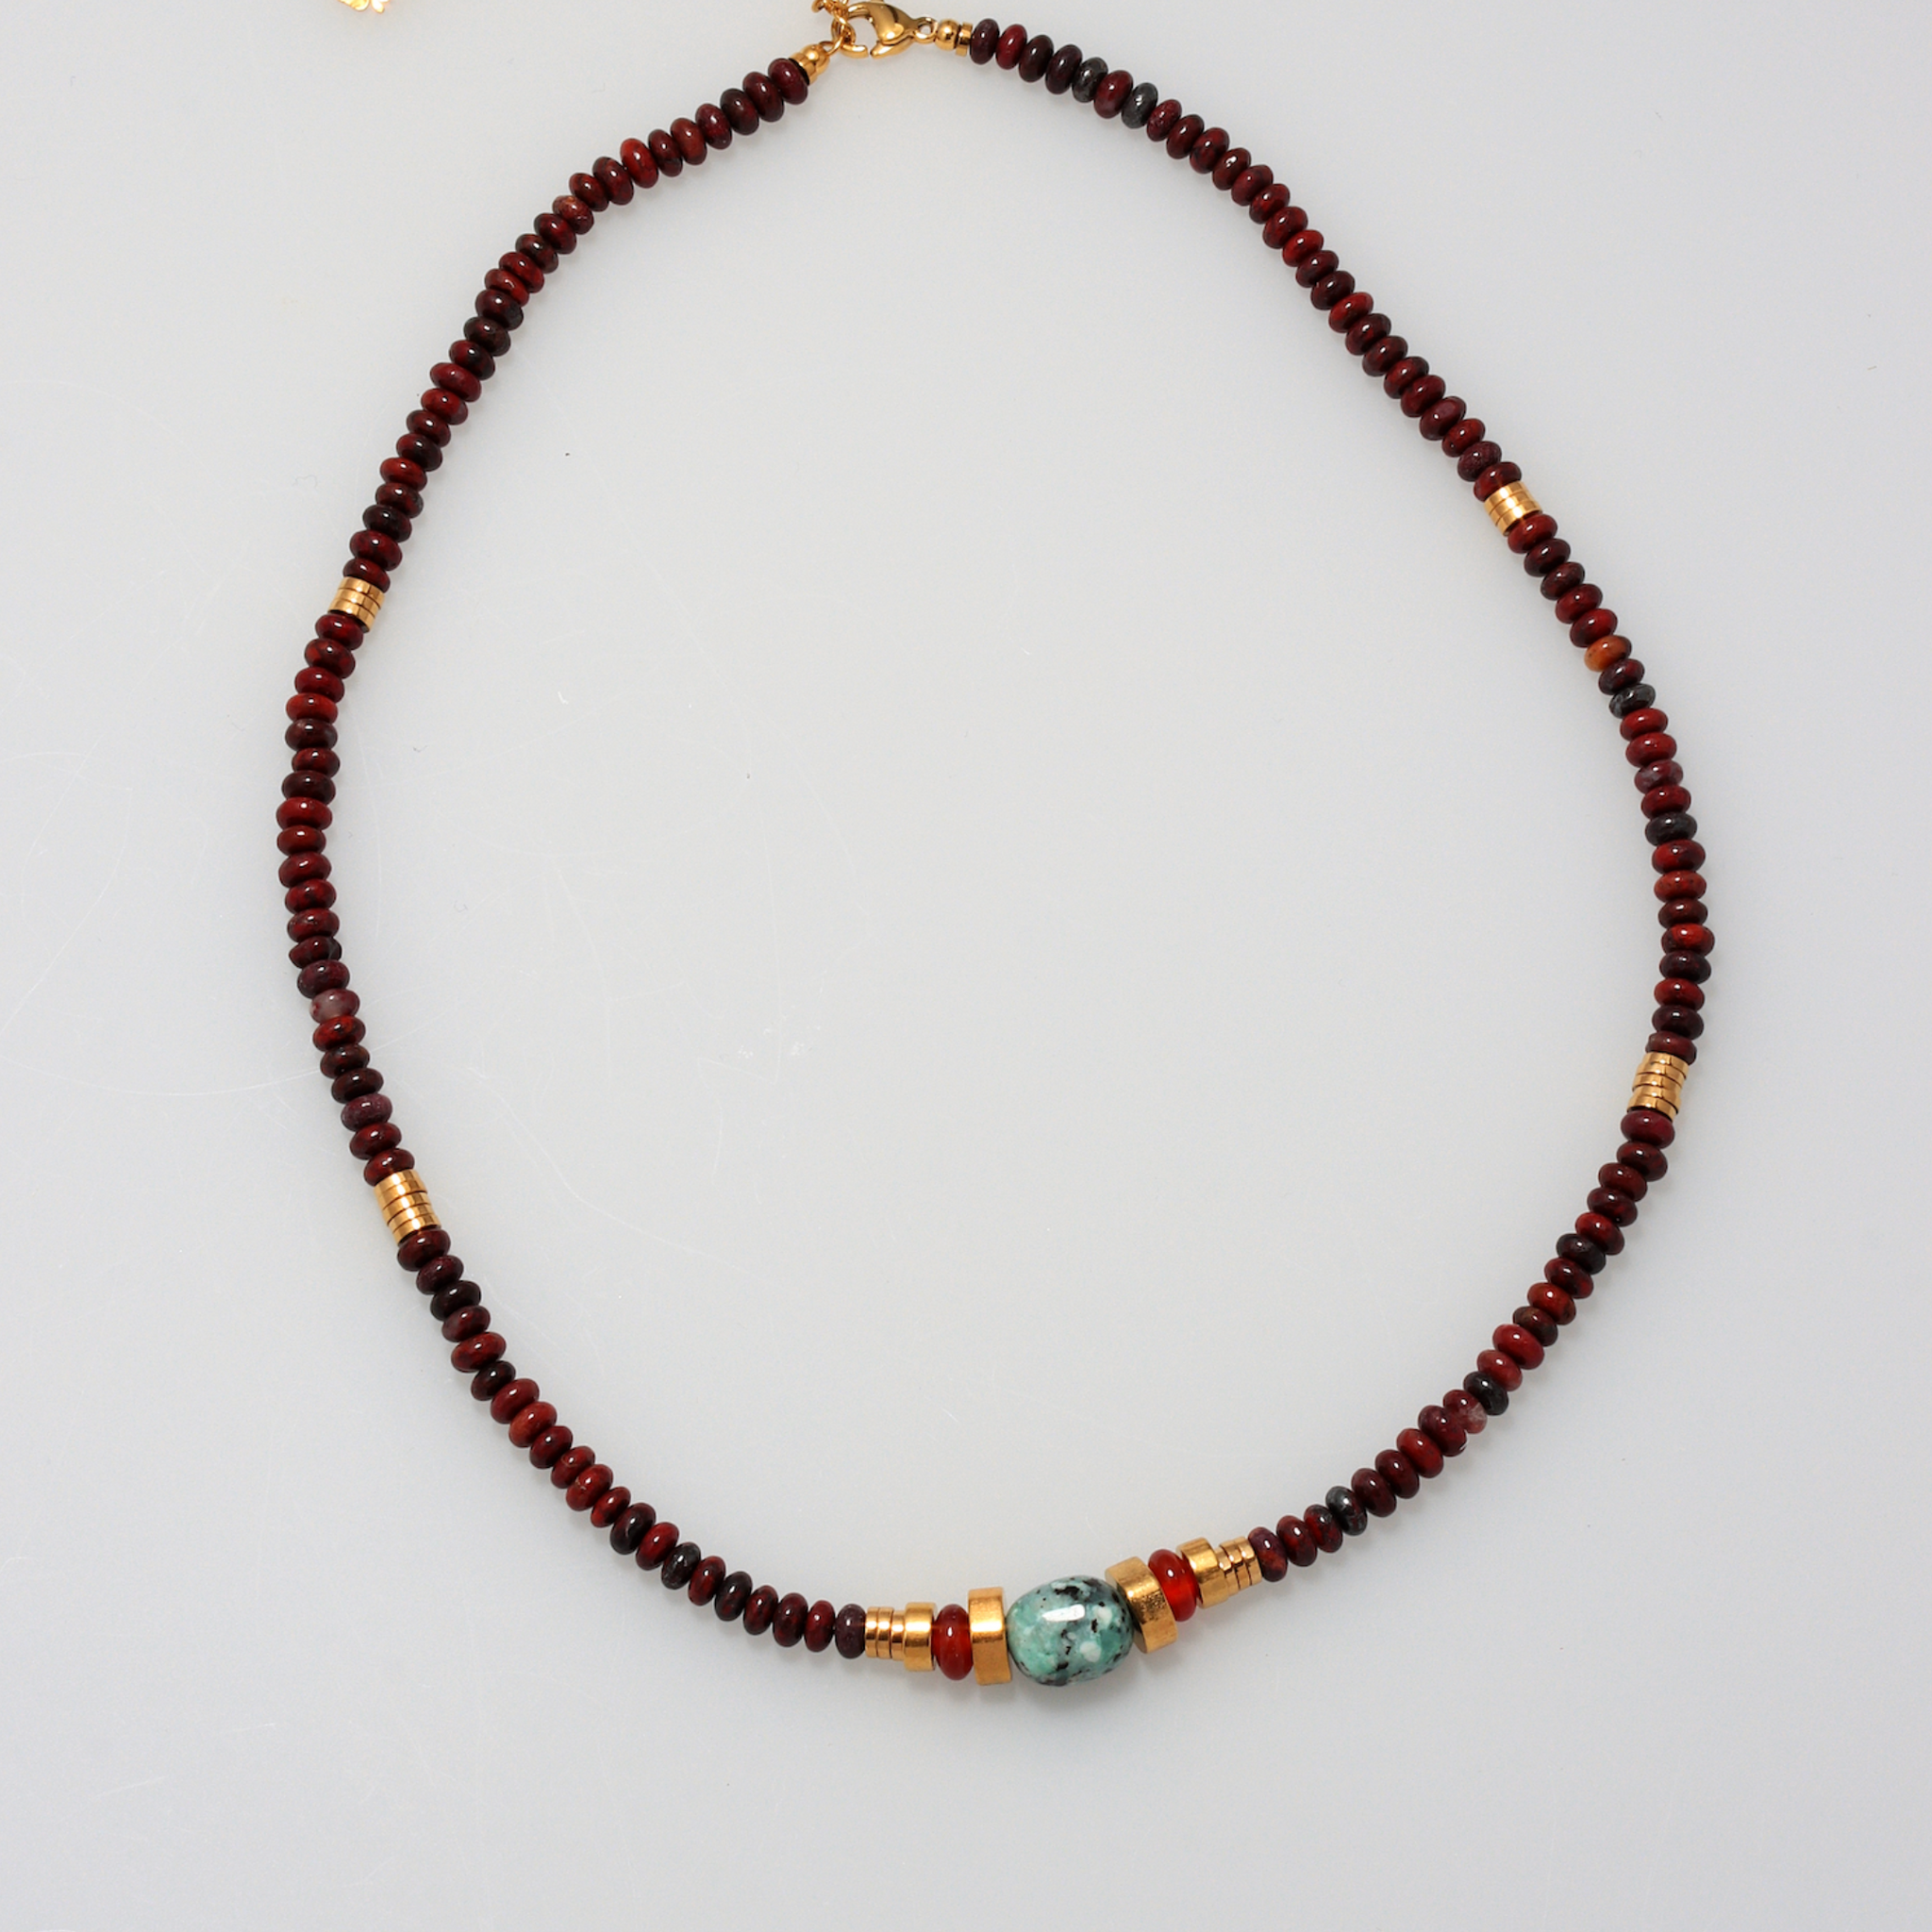 MAROCCO WITH STONE NECKLACE